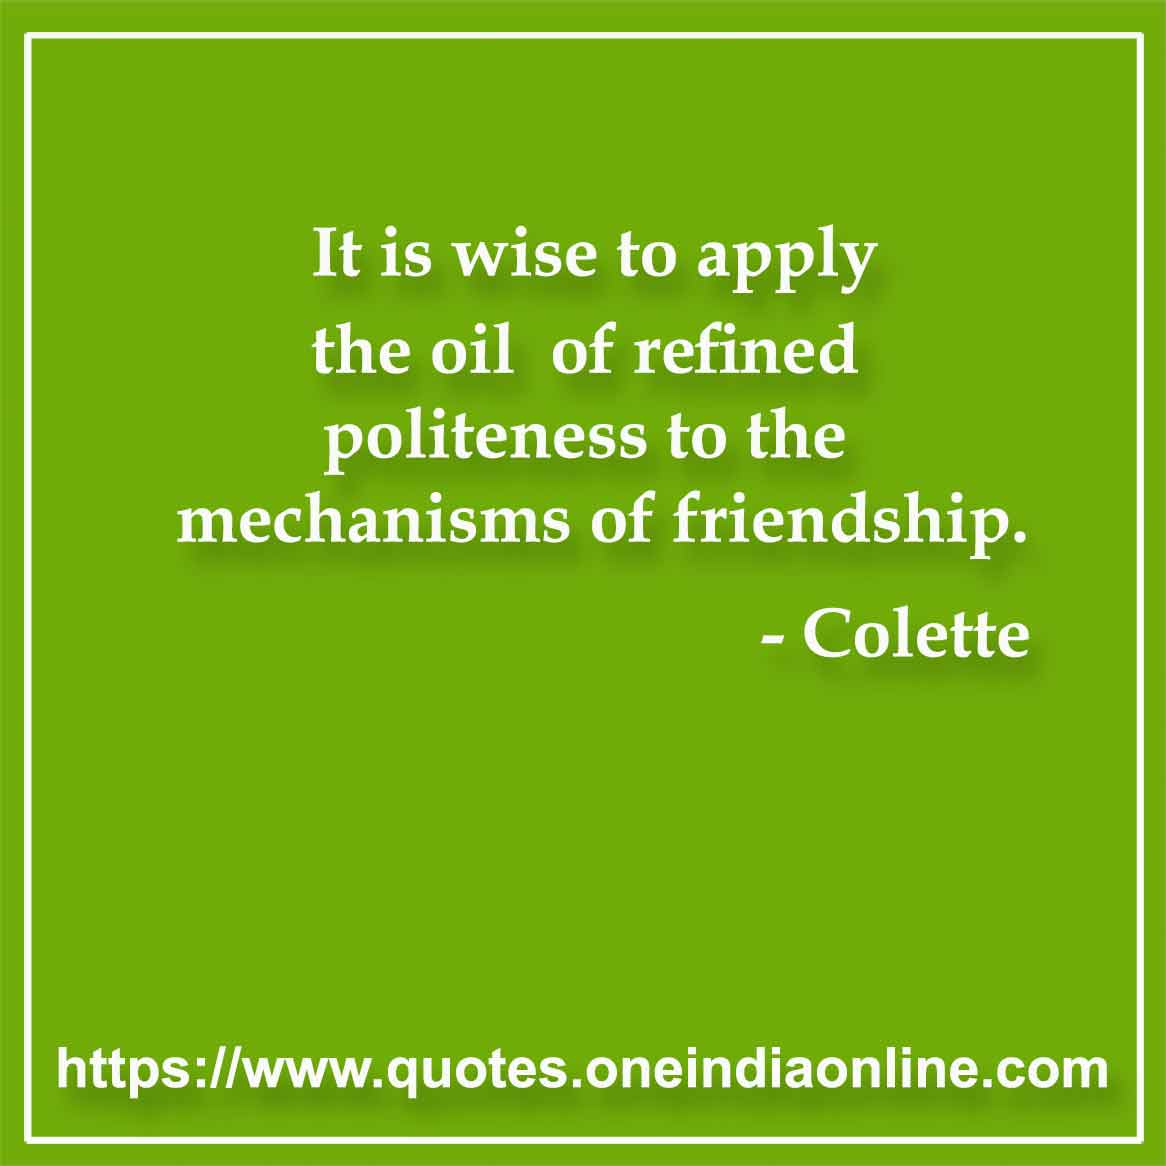 It is wise to apply the oil of refined politeness to the mechanisms of friendship. 

- Etiquette Quotes by by Colette